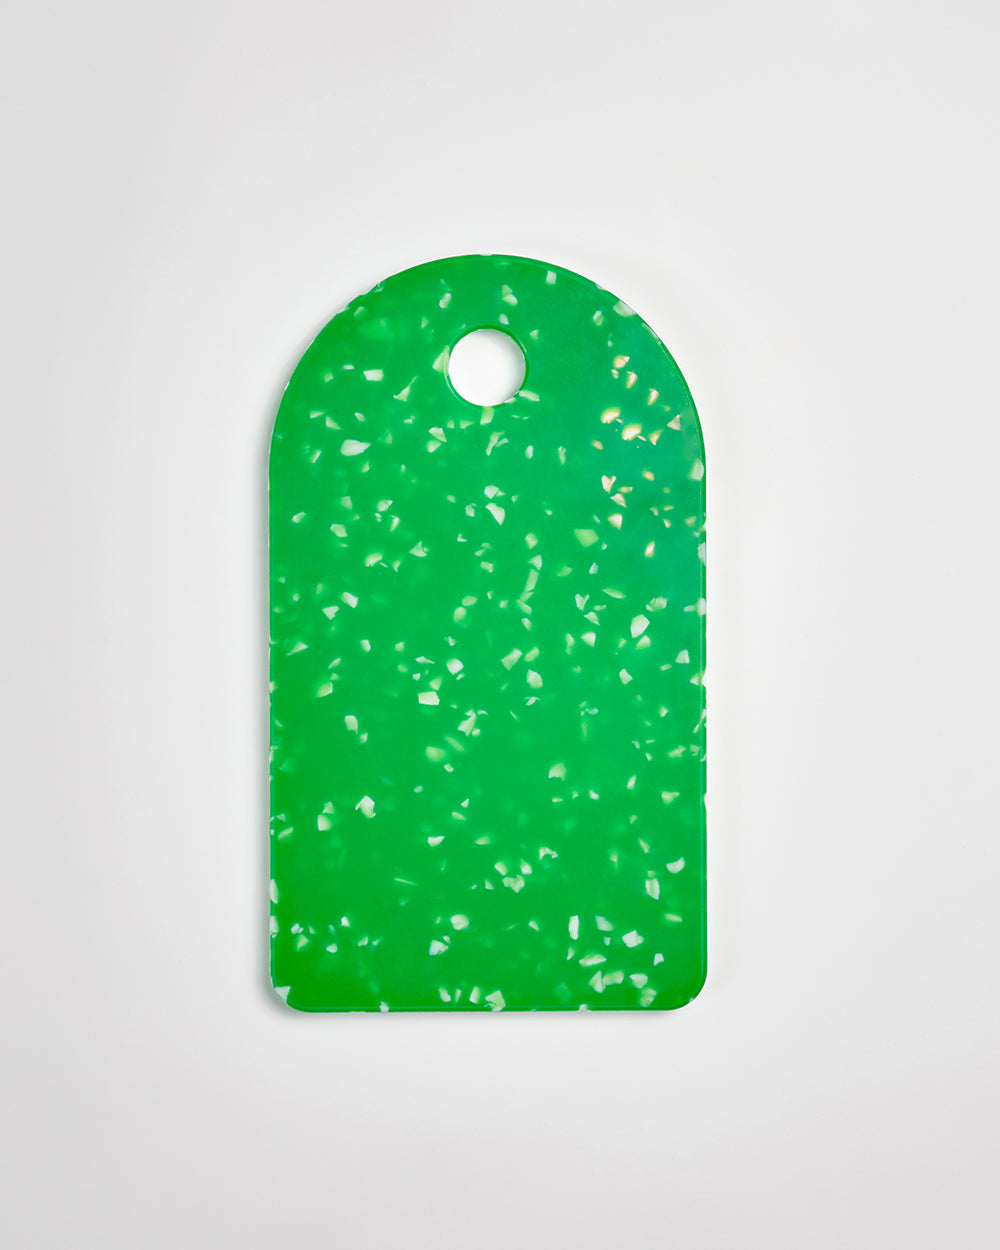 Sasni Gorgeous Green Recycled Chopping Board